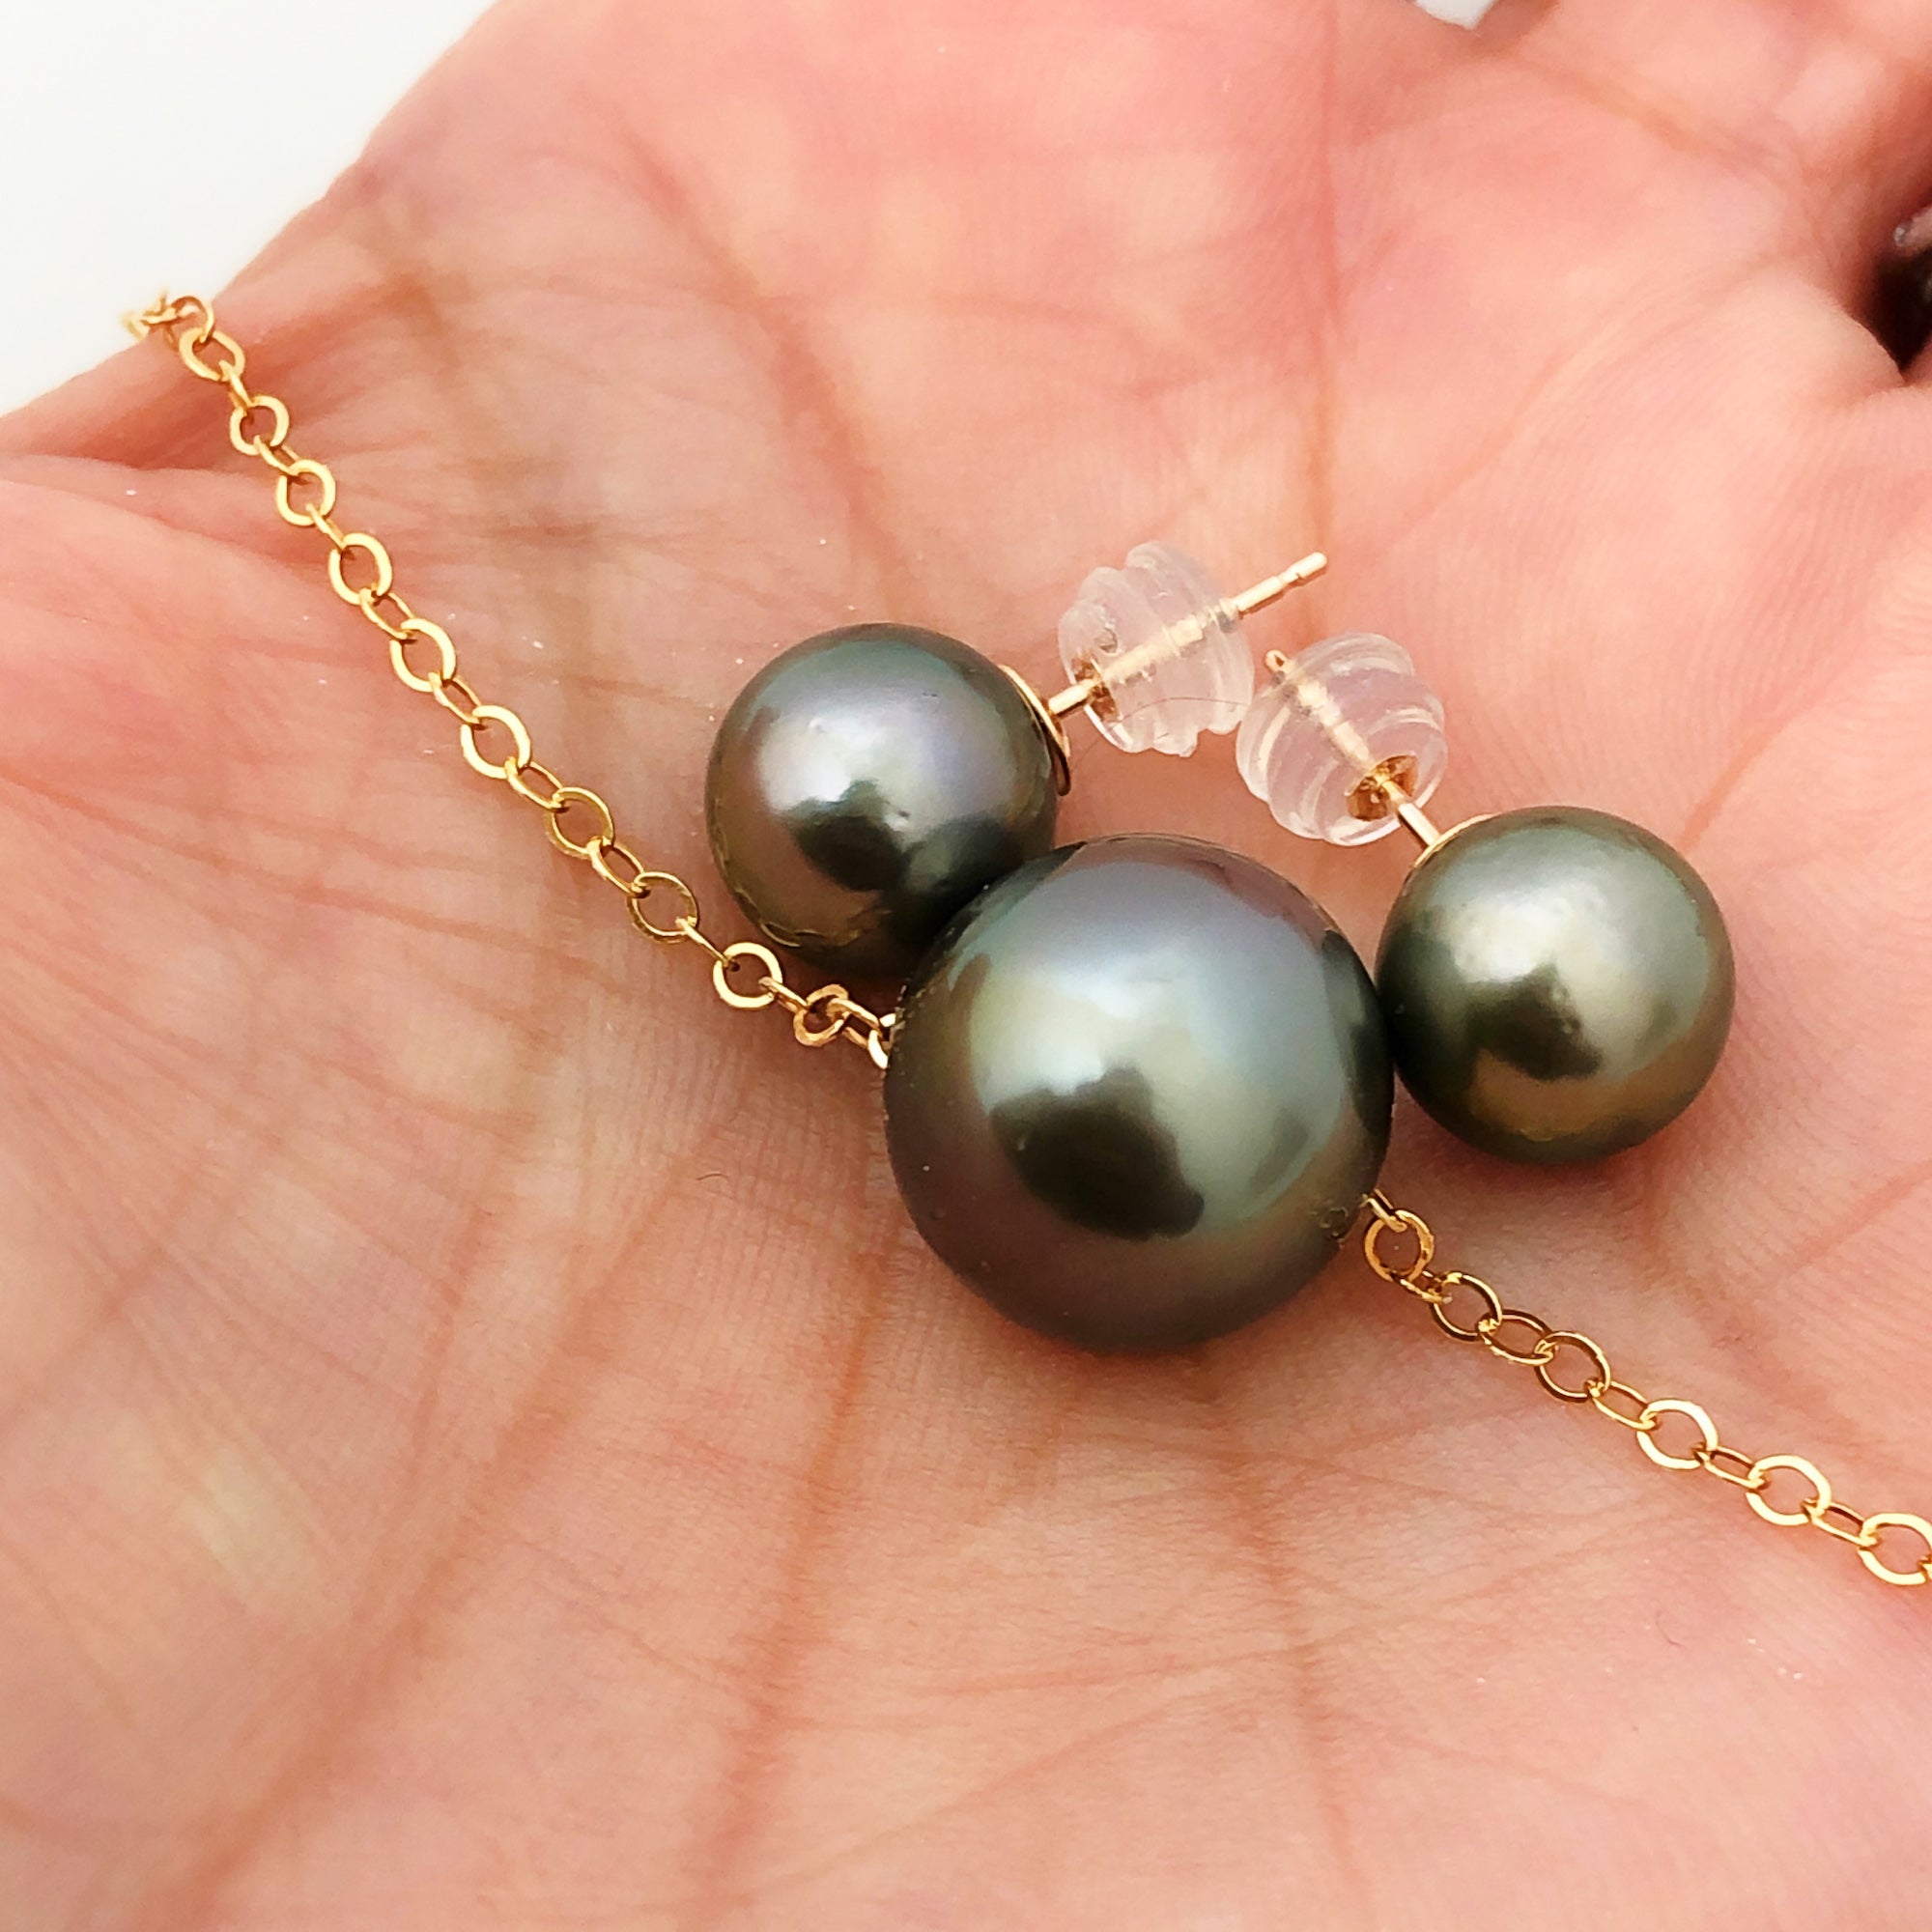 Grey Green Tahitian Pearl Earrings and Necklace Set.